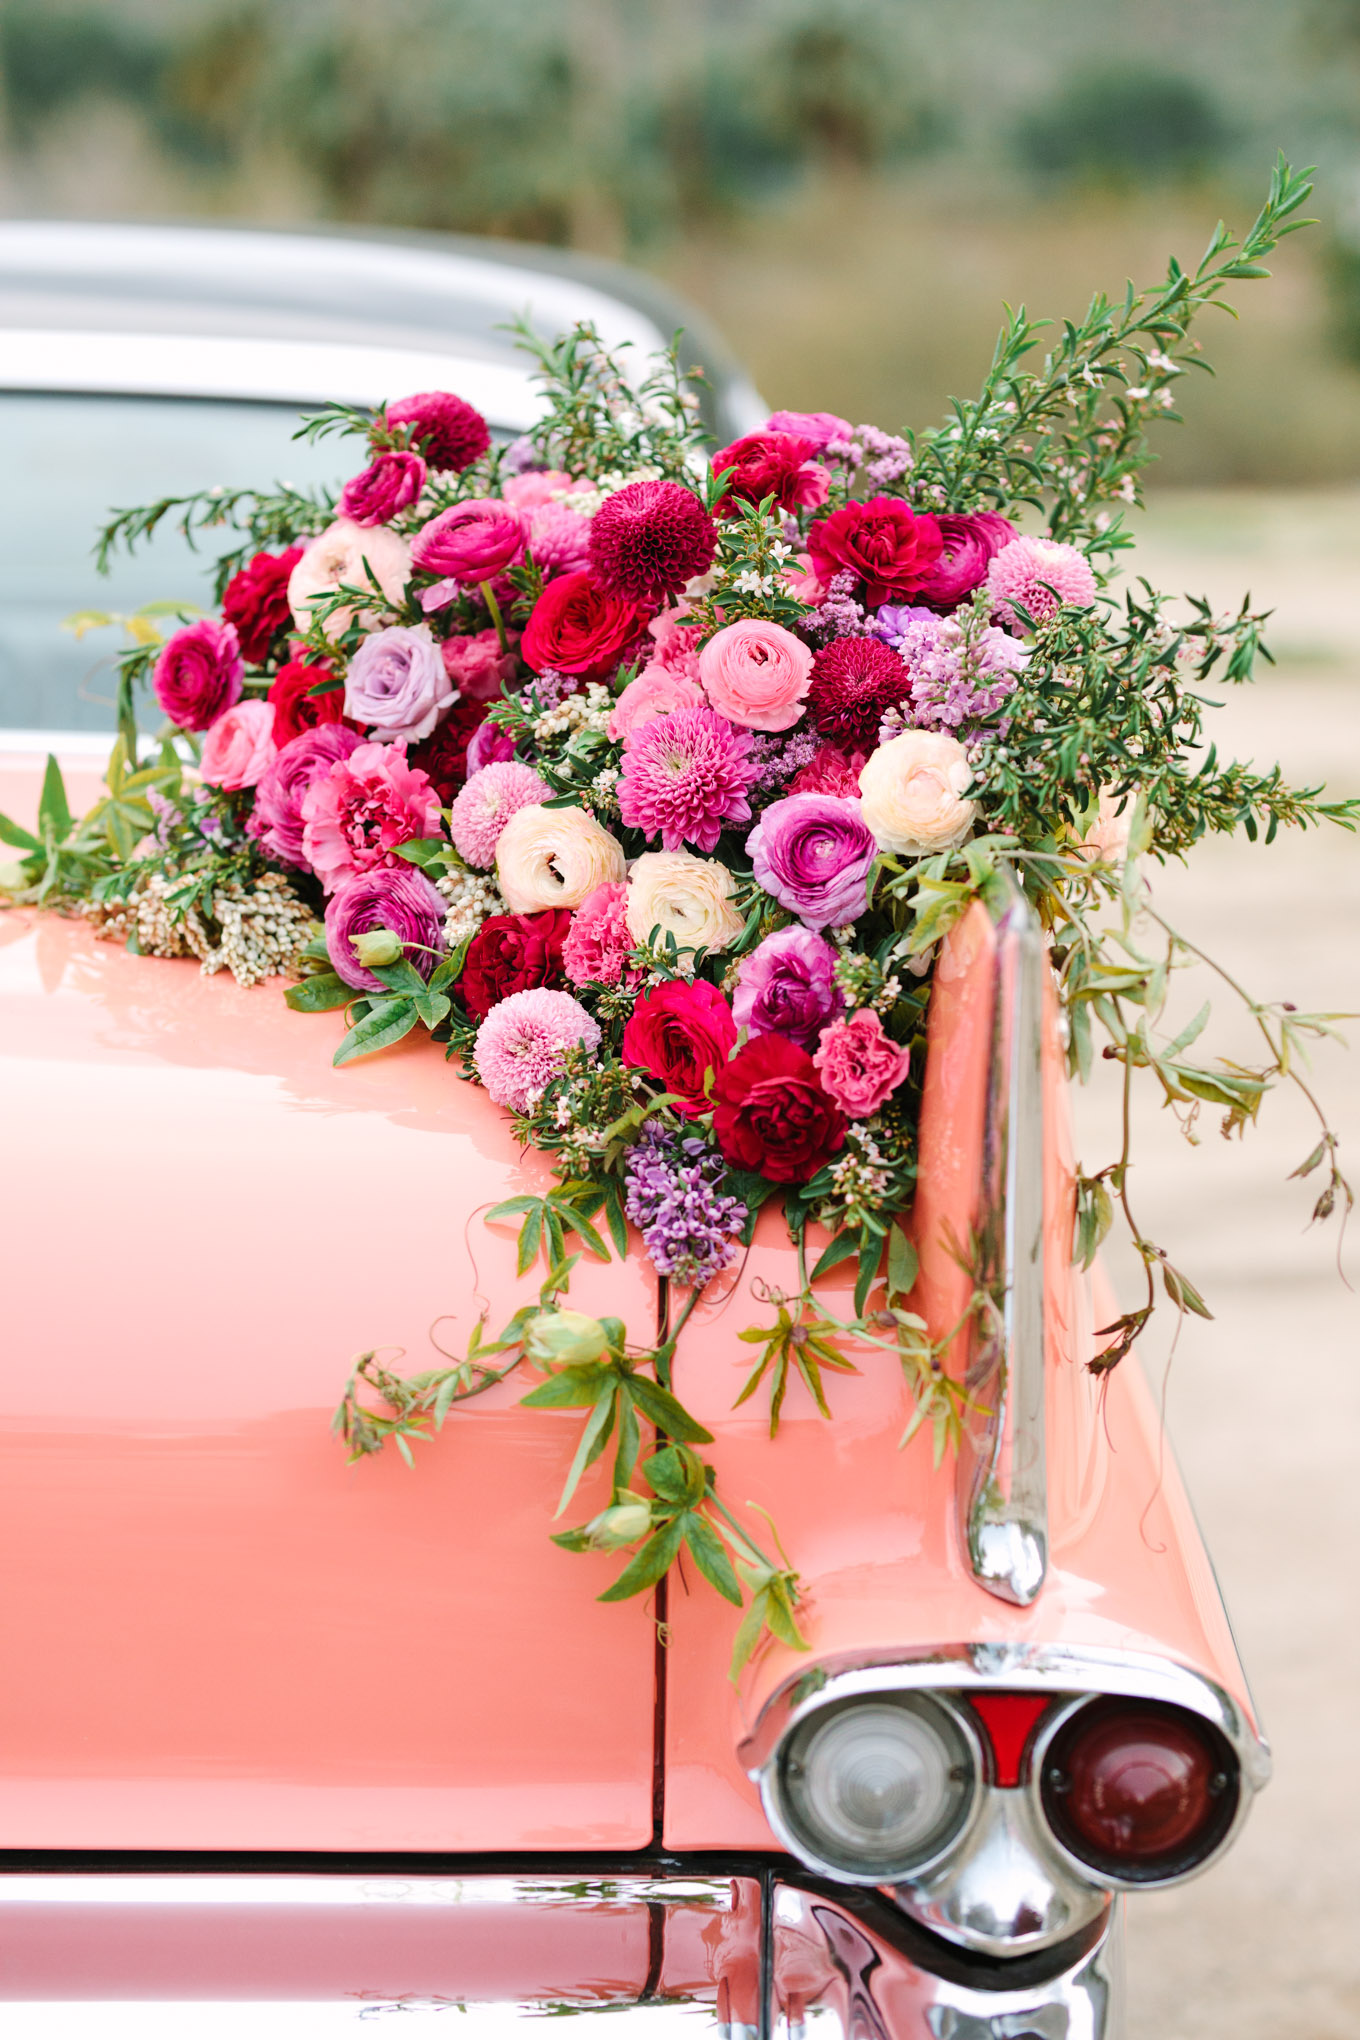 Back of car flower details. Modern vintage-inspired Palm Springs engagement session with a 1960s pink Cadillac, retro clothing, and flowers by Shindig Chic. | Colorful and elevated wedding inspiration for fun-loving couples in Southern California | #engagementsession #PalmSpringsengagement #vintageweddingdress #floralcar #pinkcar   Source: Mary Costa Photography | Los Angeles